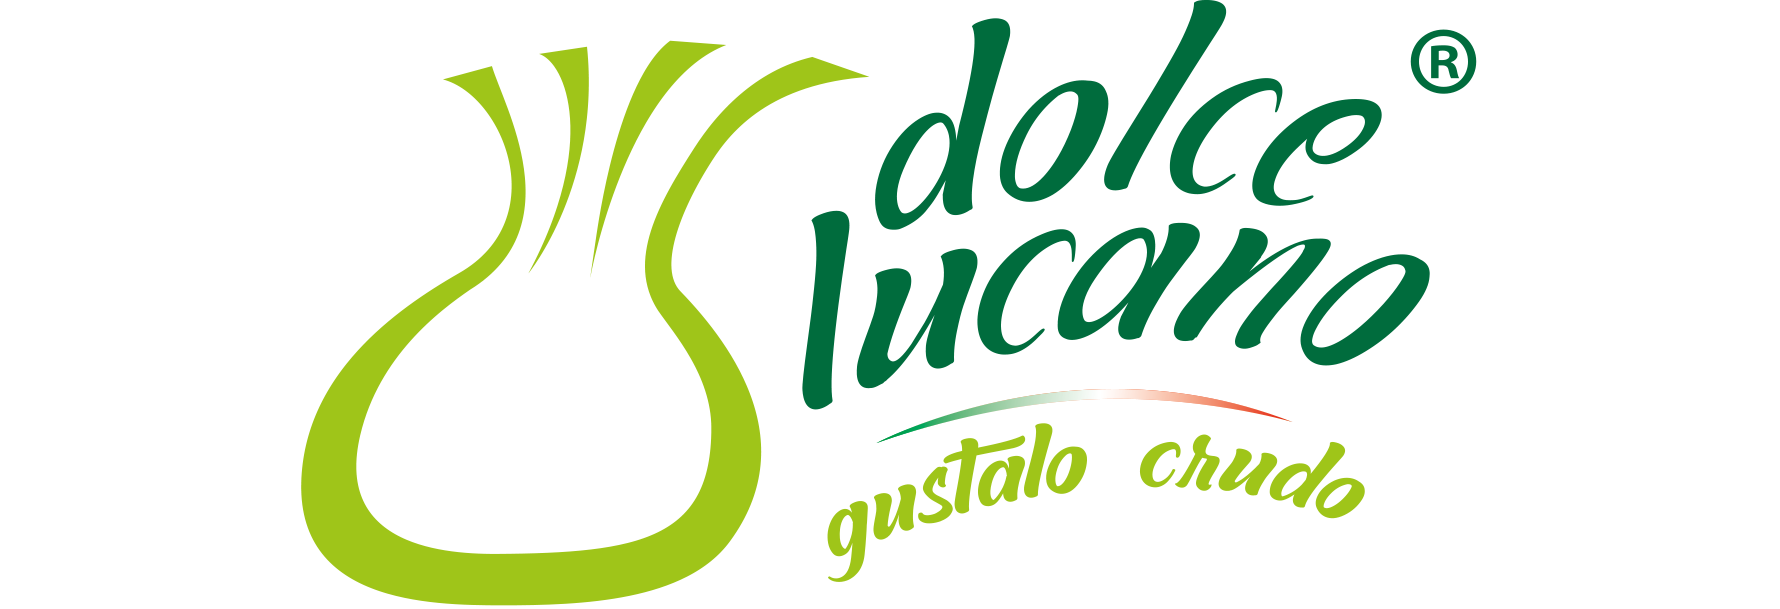 Dolce lucano